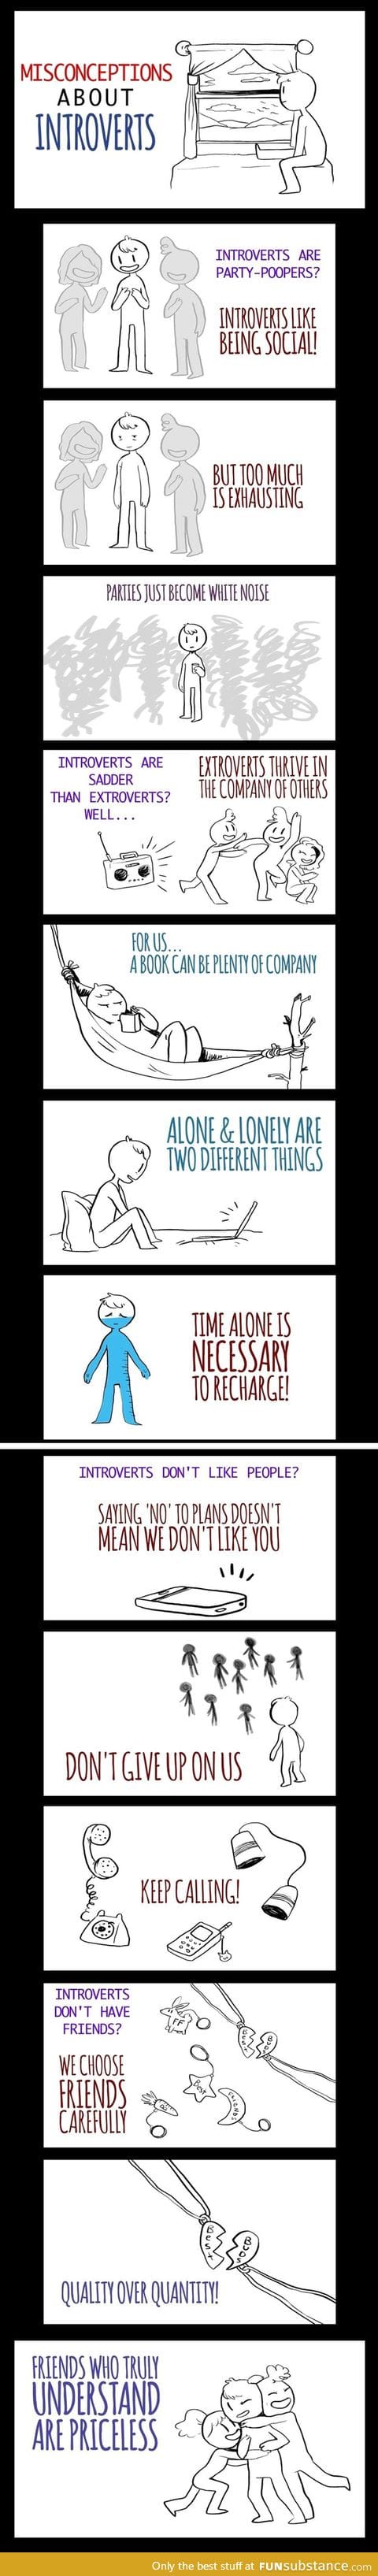 Misconceptions about introverts